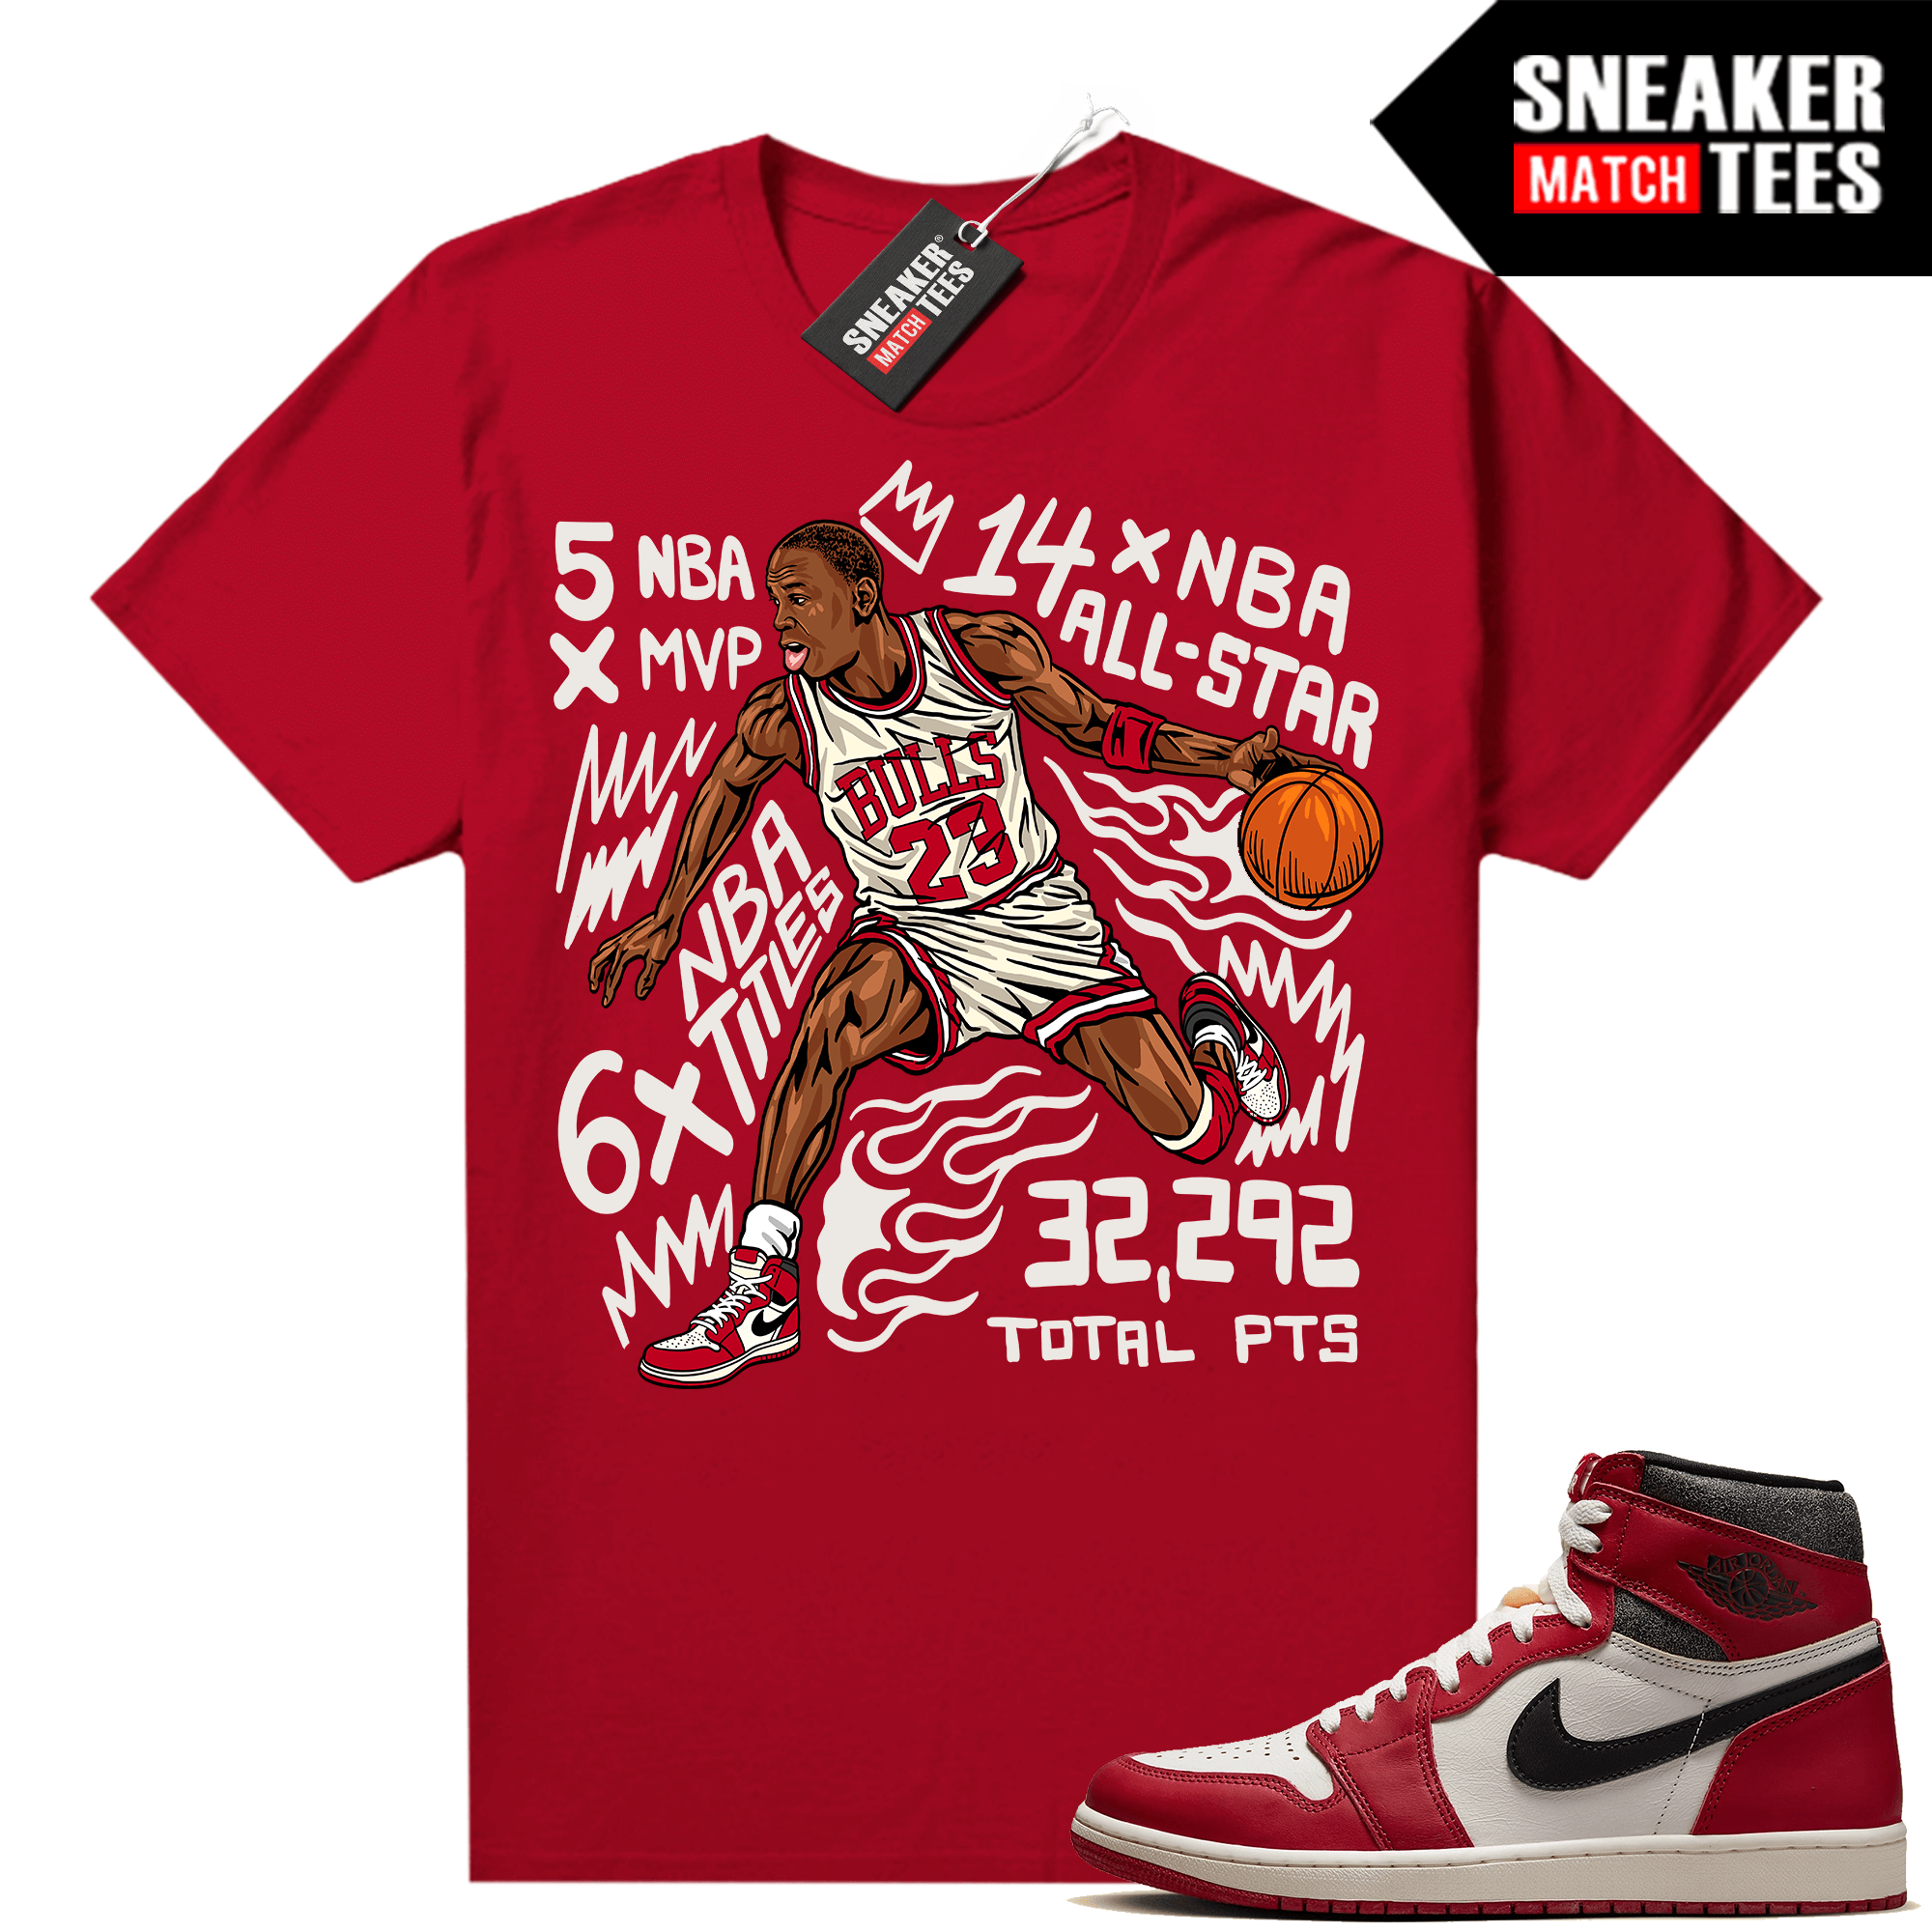 Chicago 1s Lost and Found Sneaker Match Shirt Red MJ Fast Break